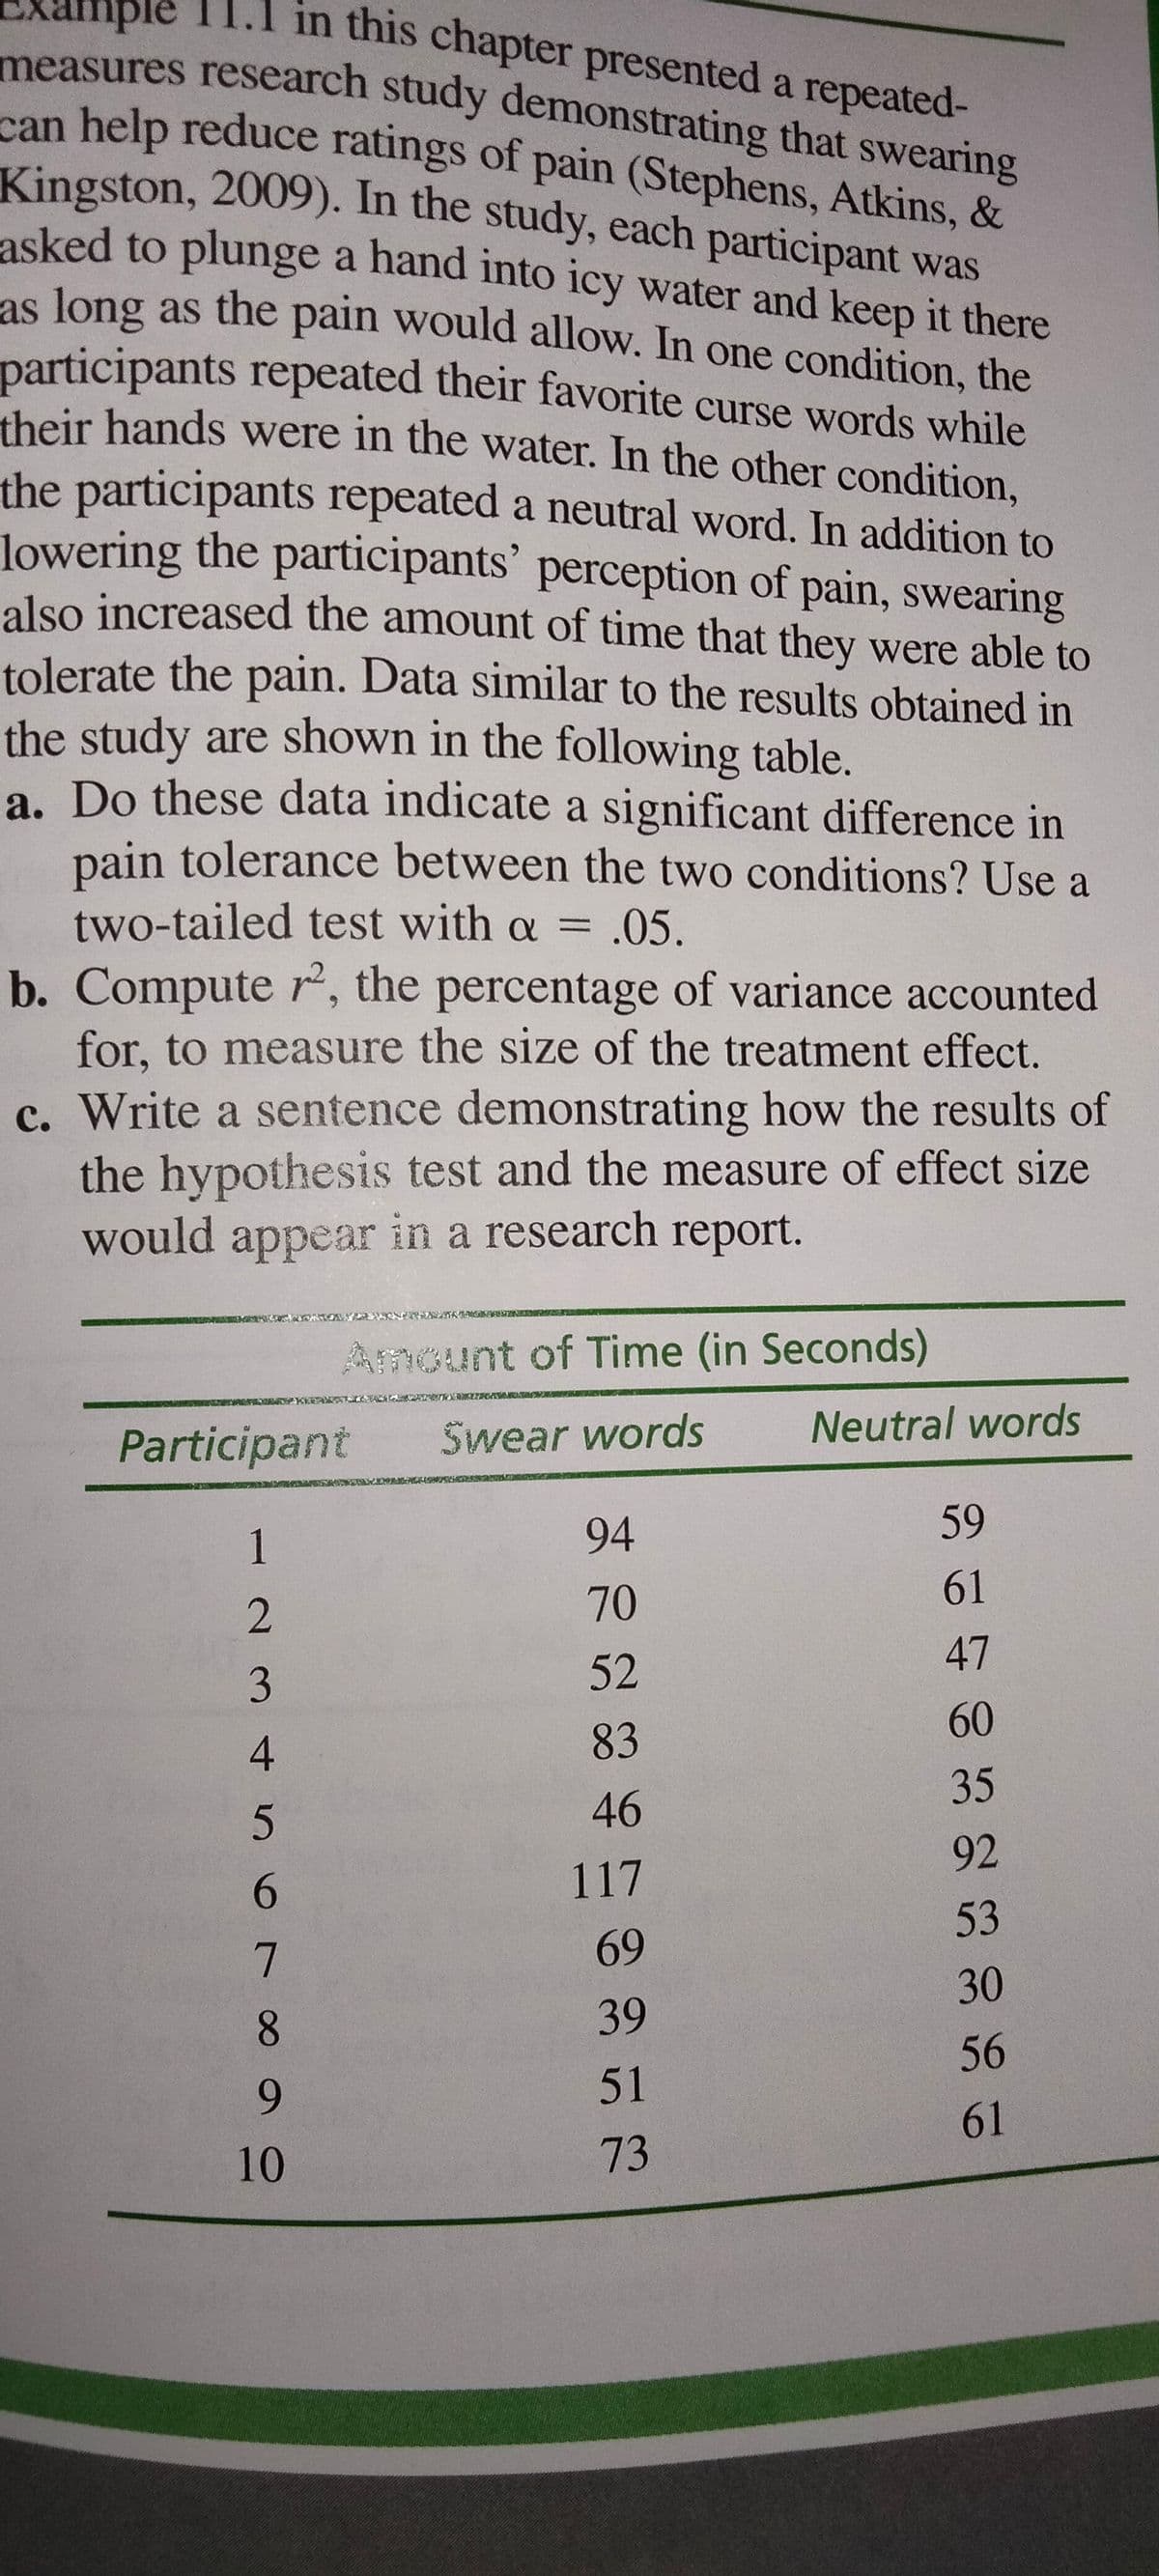 Example
II.I in this chapter presented a repeated-
measures research study demonstrating that swearing
can help reduce ratings of pain (Stephens, Atkins, &
Kingston, 2009). In the study, each participant v
Kingston, 2009). In the study, each participant was
asked to plunge a hand into icy water and keep it there
as long as the pain would allow. In one condition, the
participants repeated their favorite curse words while
their hands were in the water. In the other condition,
the participants repeated a neutral word. In addition to
lowering the participants' perception of pain, swearing
also increased the amount of time that they were able to
tolerate the pain. Data similar to the results obtained in
the study are shown in the following table.
a. Do these data indicate a significant difference in
pain tolerance between the two conditions? Use a
two-tailed test with a = .05.
%3D
b. Compute r, the percentage of variance accounted
for, to measure the size of the treatment effect.
c. Write a sentence demonstrating how the results of
the hypothesis test and the measure of effect size
would appear in a research report.
Ancunt of Time (in Seconds)
Participant
Swear words
Neutral words
94
59
1
70
61
47
52
60
4
83
35
46
92
6.
117
53
69
30
39
56
9.
51
61
10
73
5 78
